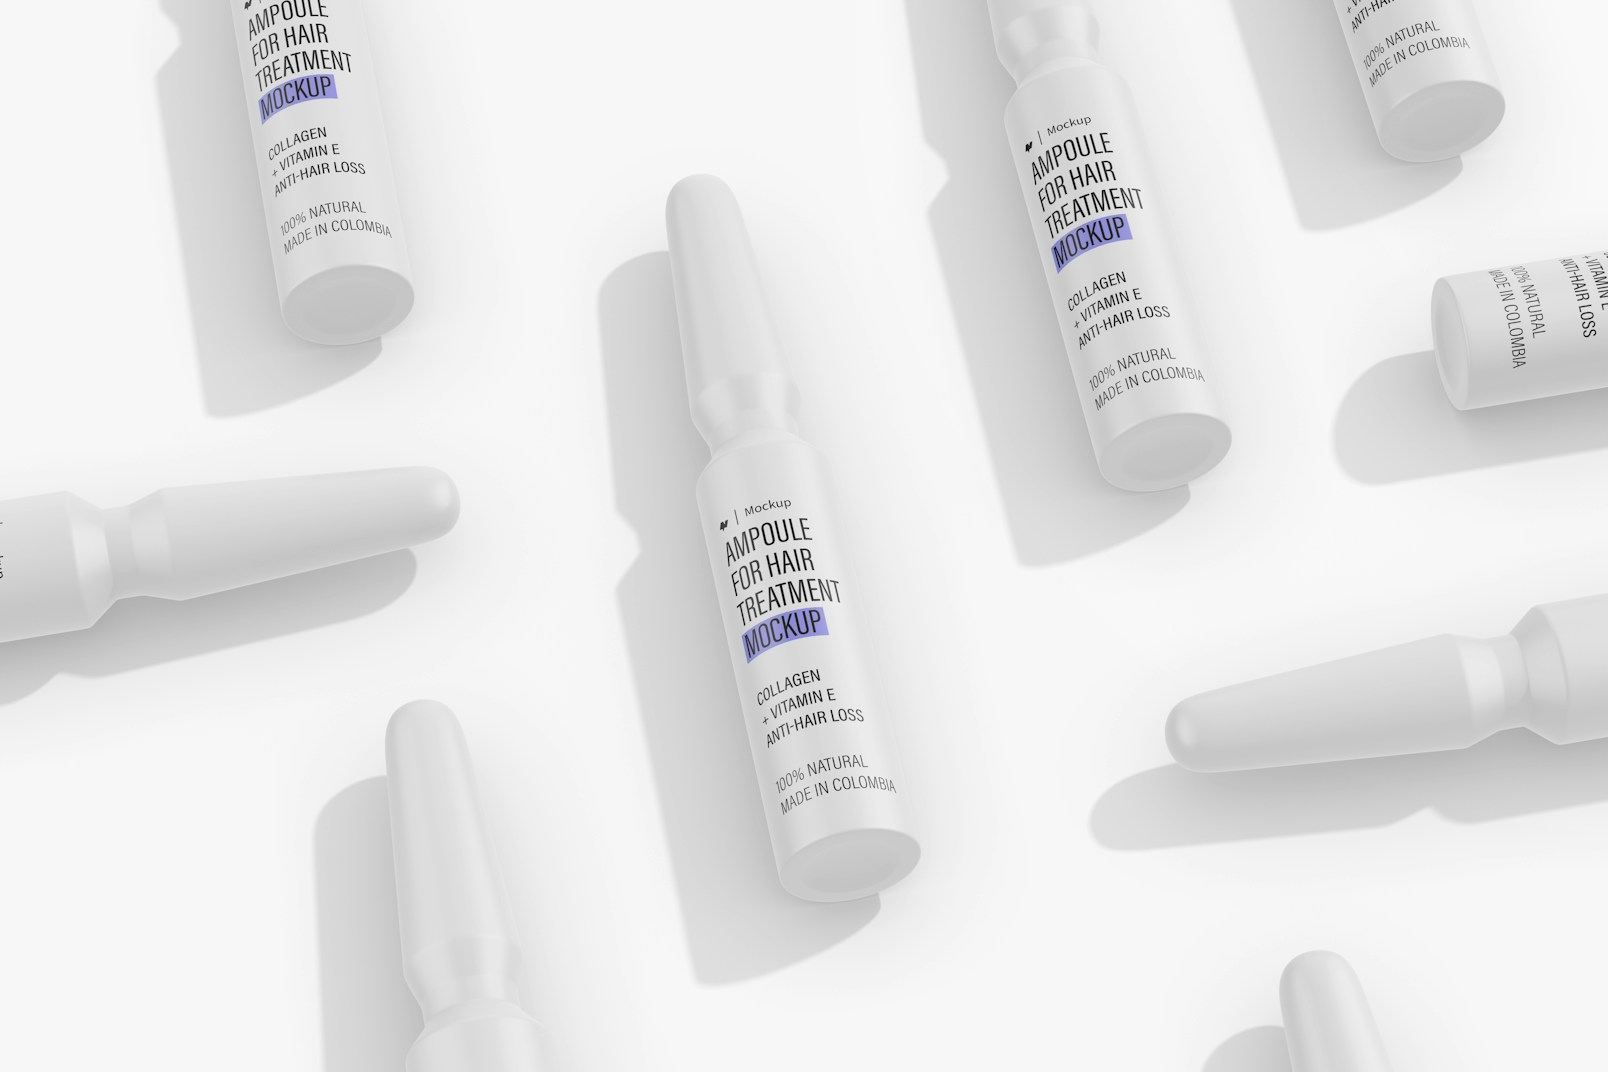 Ampoule for Hair Treatment Mockup, Mosaic